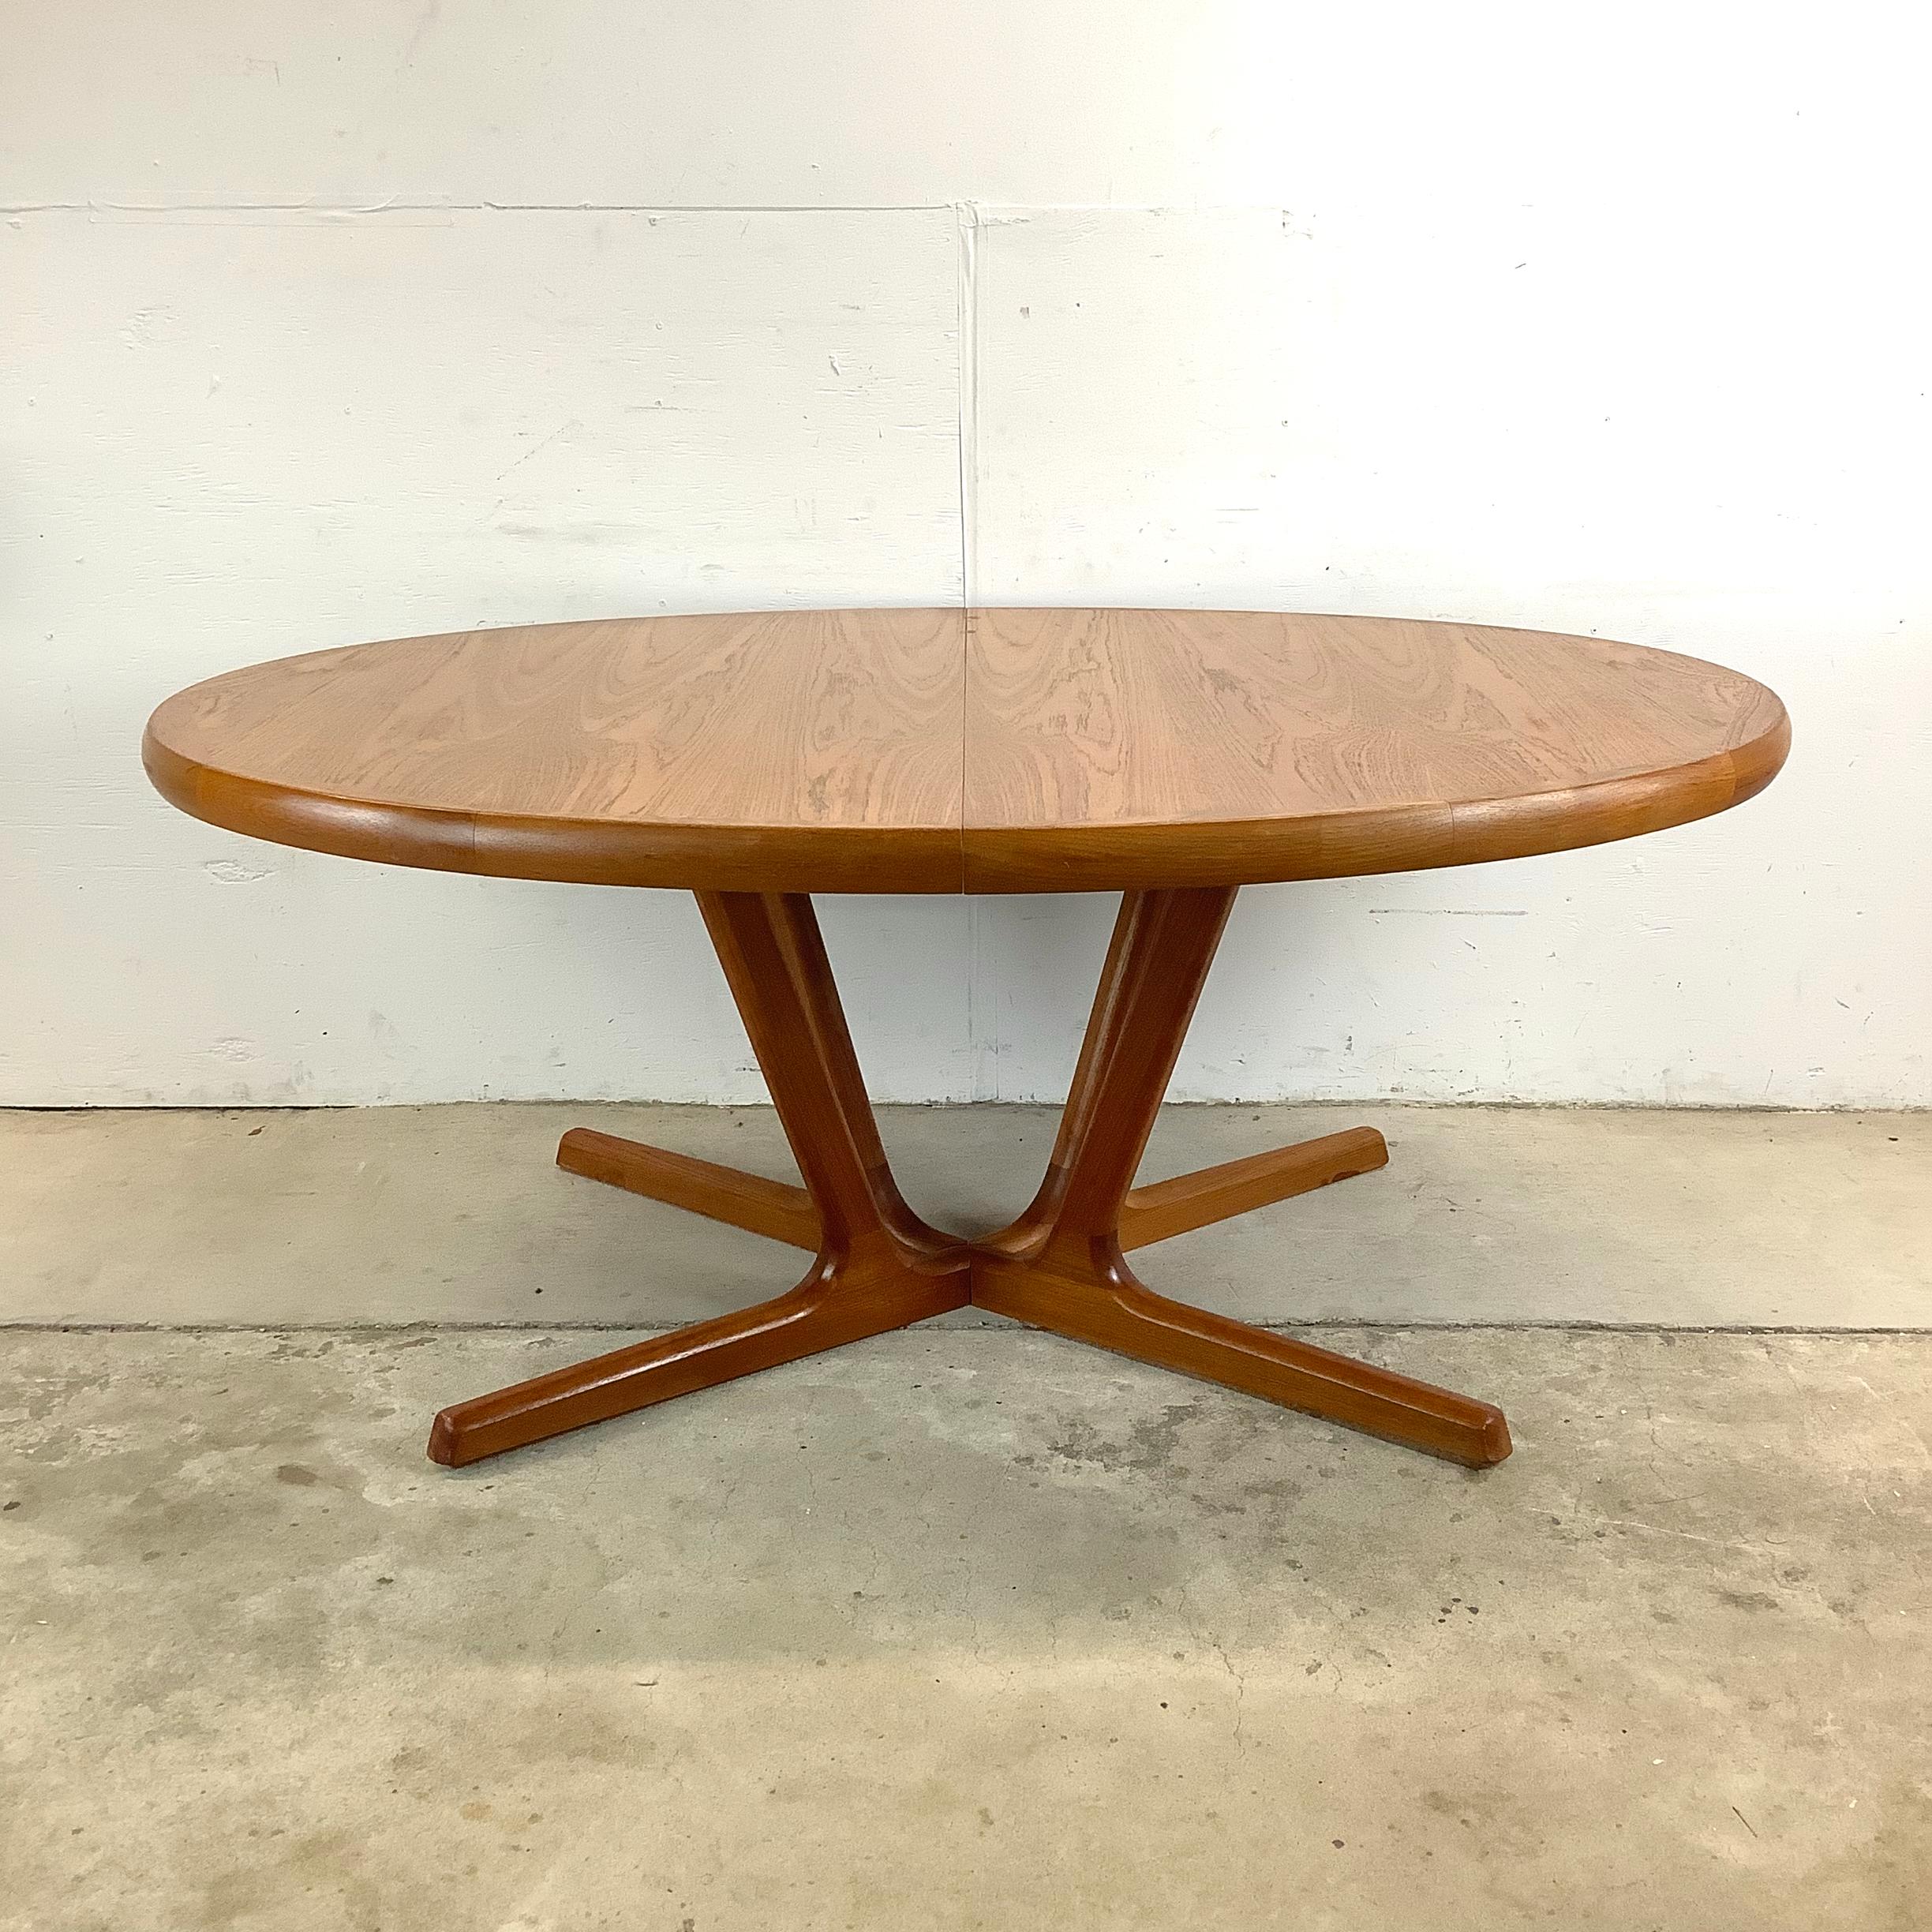 Introducing our Scandinavian Modern Teak Dining Table with Leaves – a timeless centerpiece for your dining room that seamlessly blends sleek design with practicality. Crafted from exquisite teak wood, this vintage dining table radiates the warm,